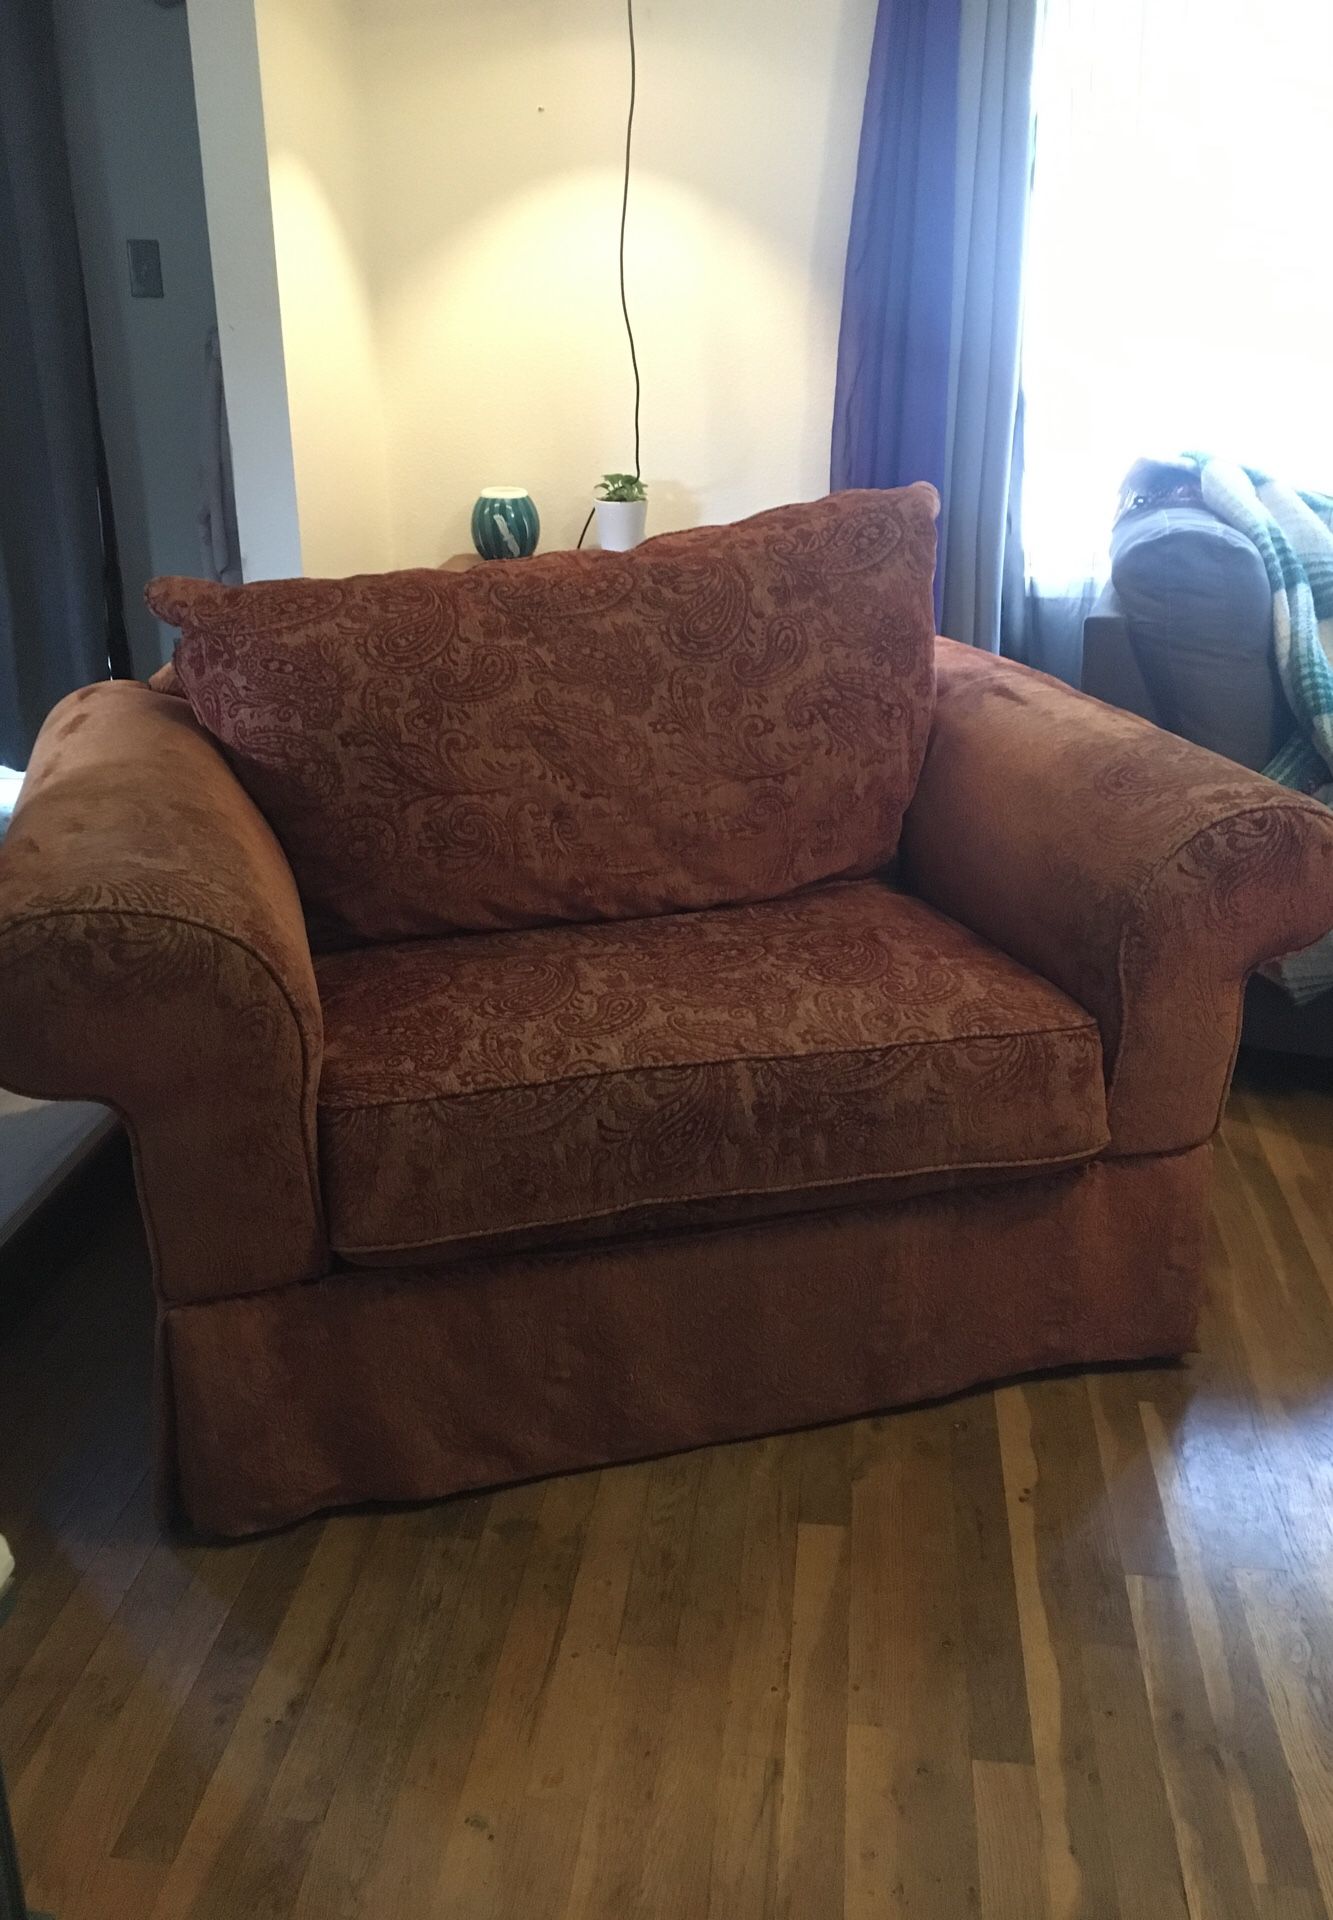 Free oversized chair!